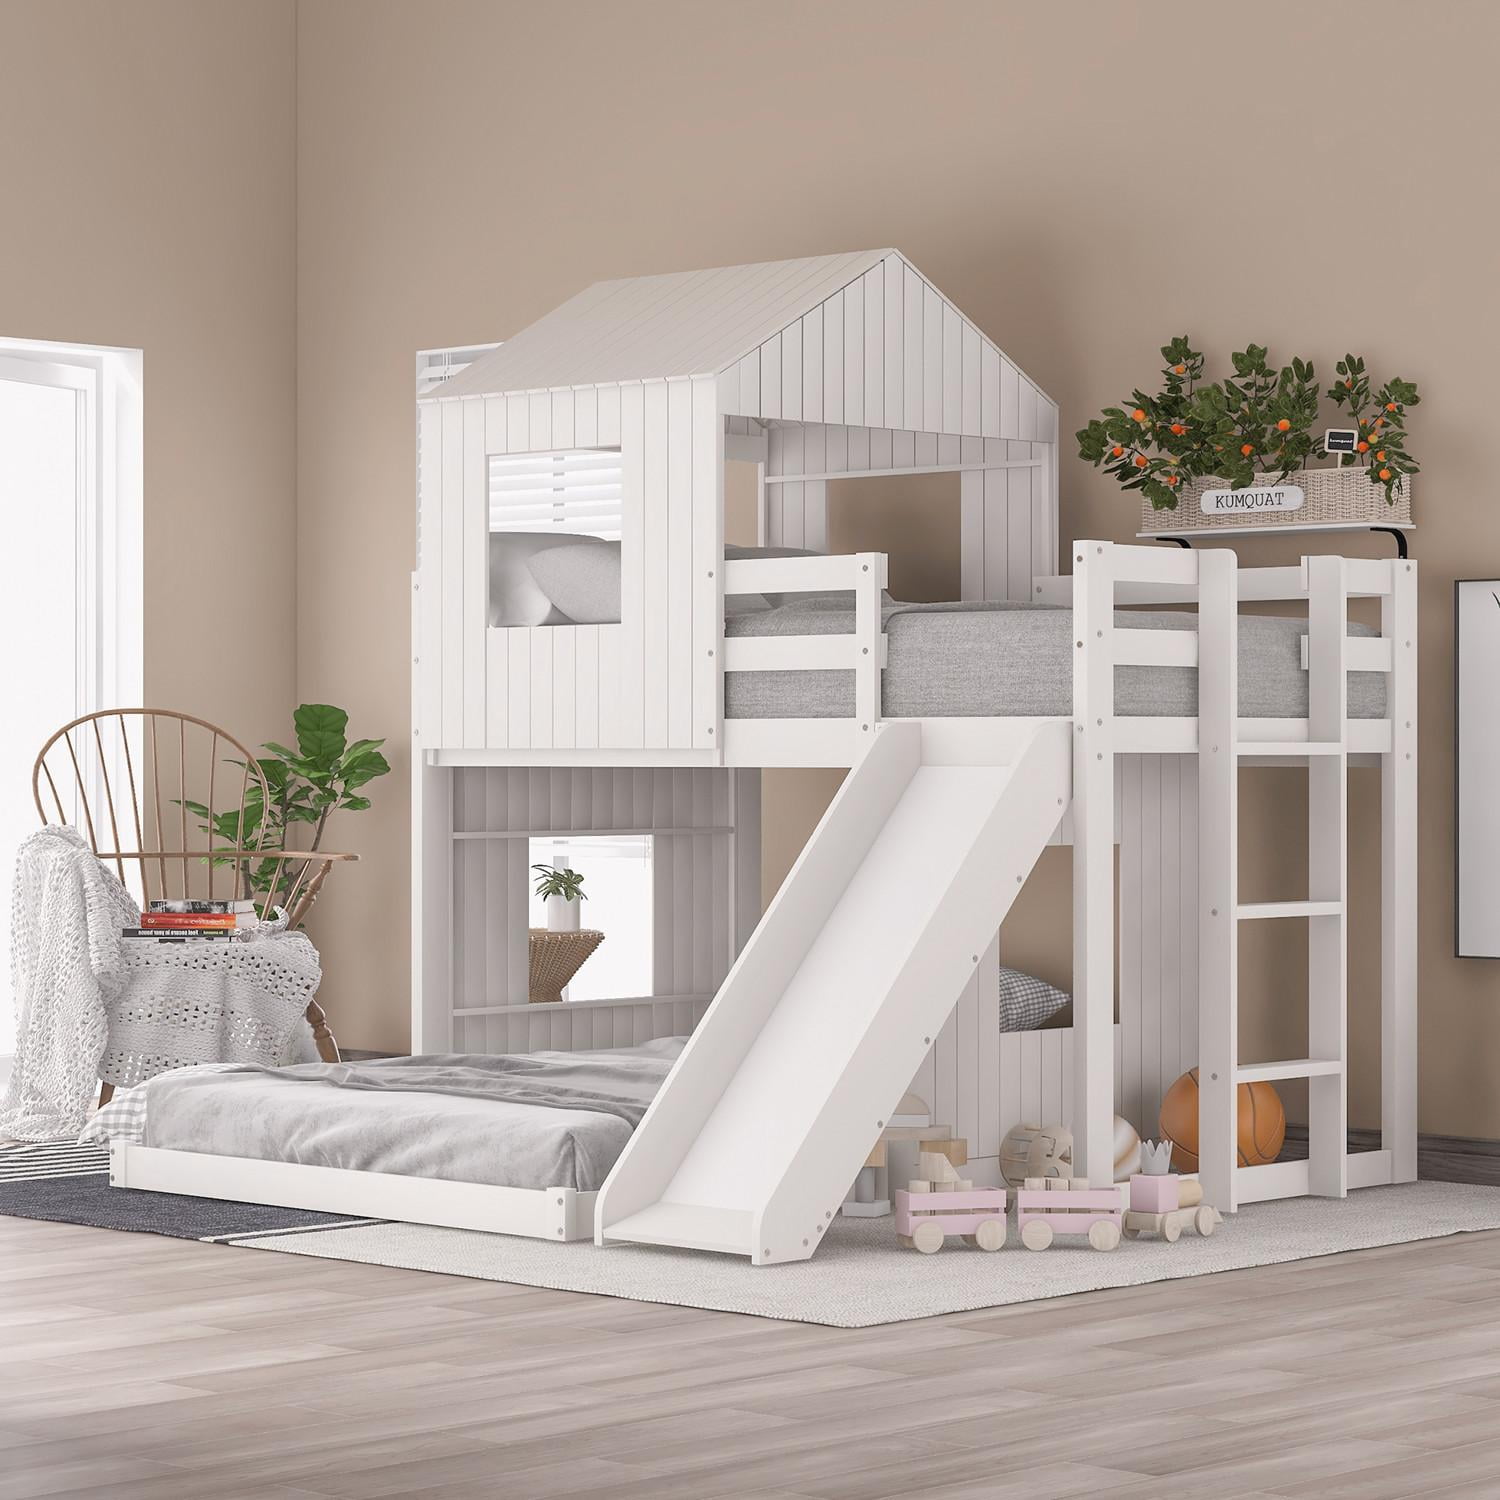 Twin Over Full House Bed Bunk Beds With Slide, Wood Bunk Beds With Roof And  Guard Rail For Kids, Teens, Girl Or Boys, No Box Spring Needed, White  80.8''L X 78.7''W X